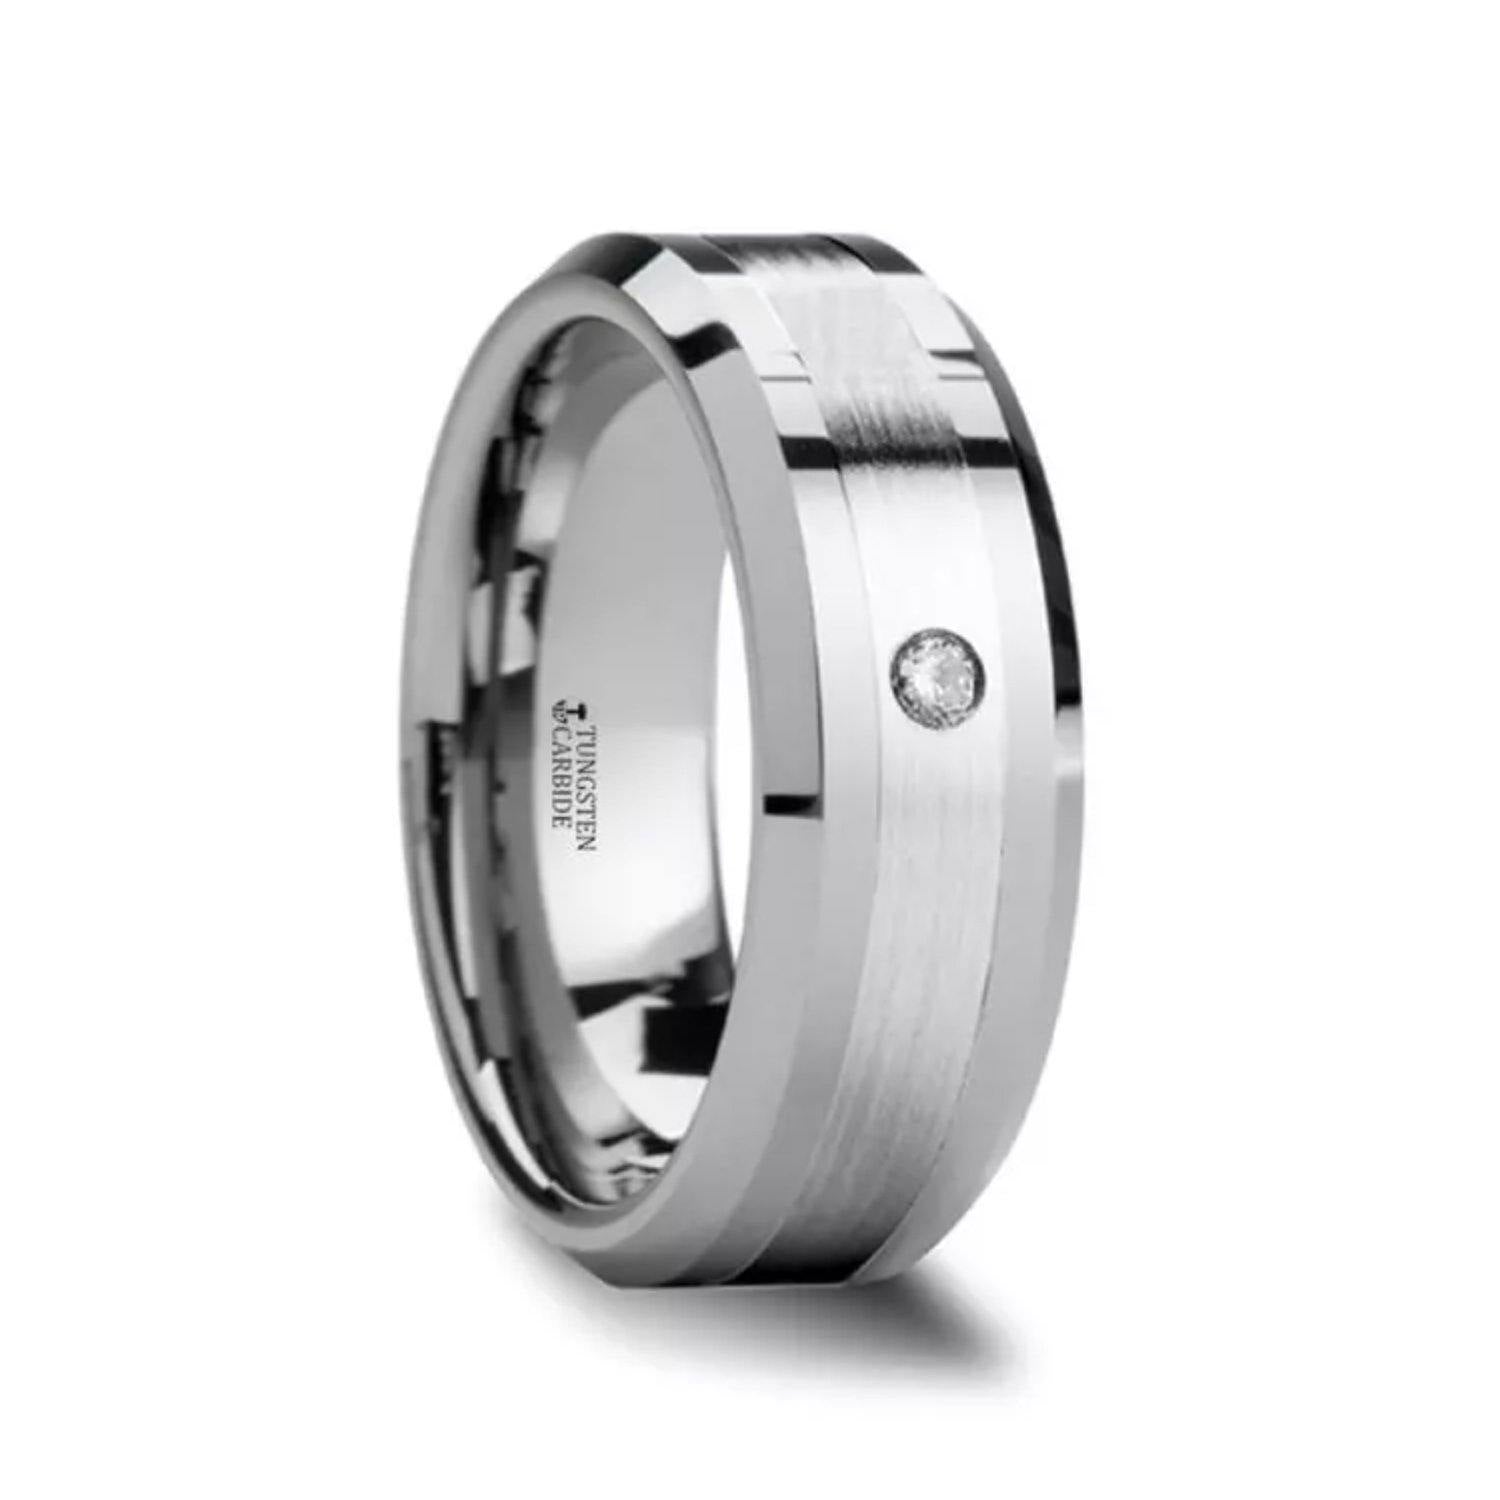 LEOPOLD -Silver Inlaid Beveled Tungsten Ring with Diamond - 6mm & 8mm - The Rutile Ltd